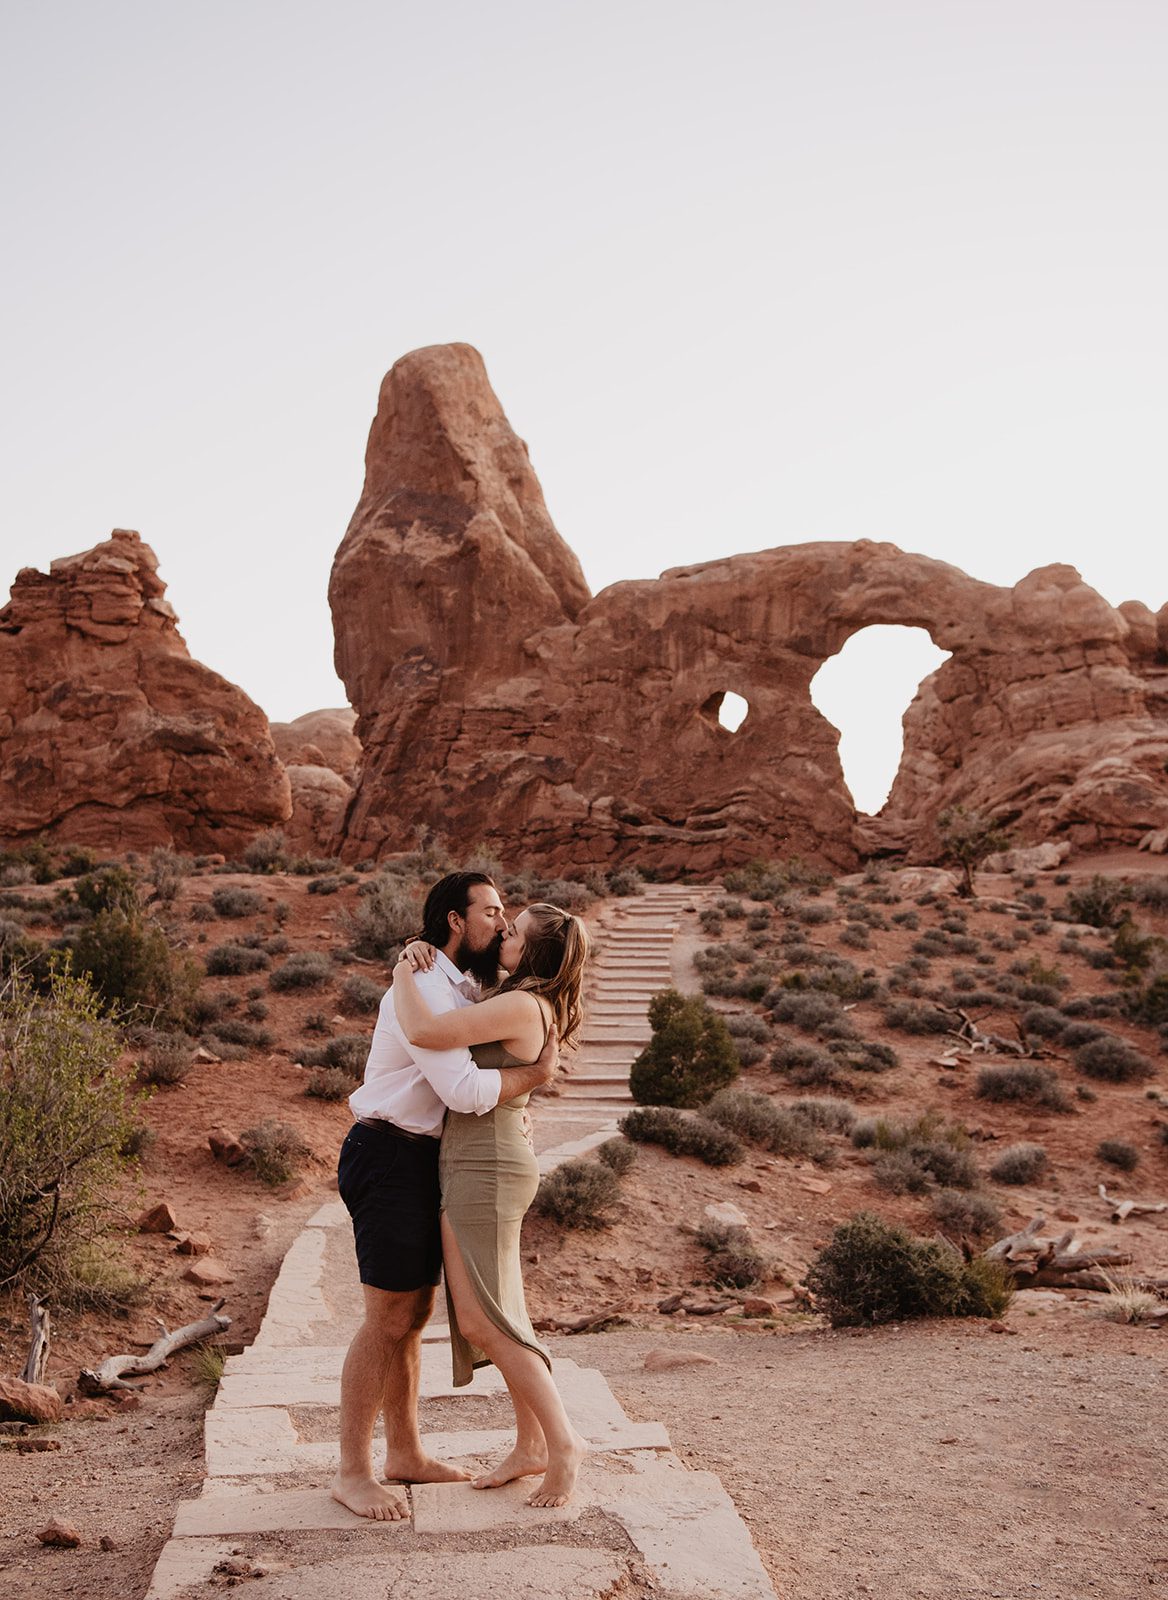 Utah engagement photographer captures Arches National Park wedding location with couple embracing